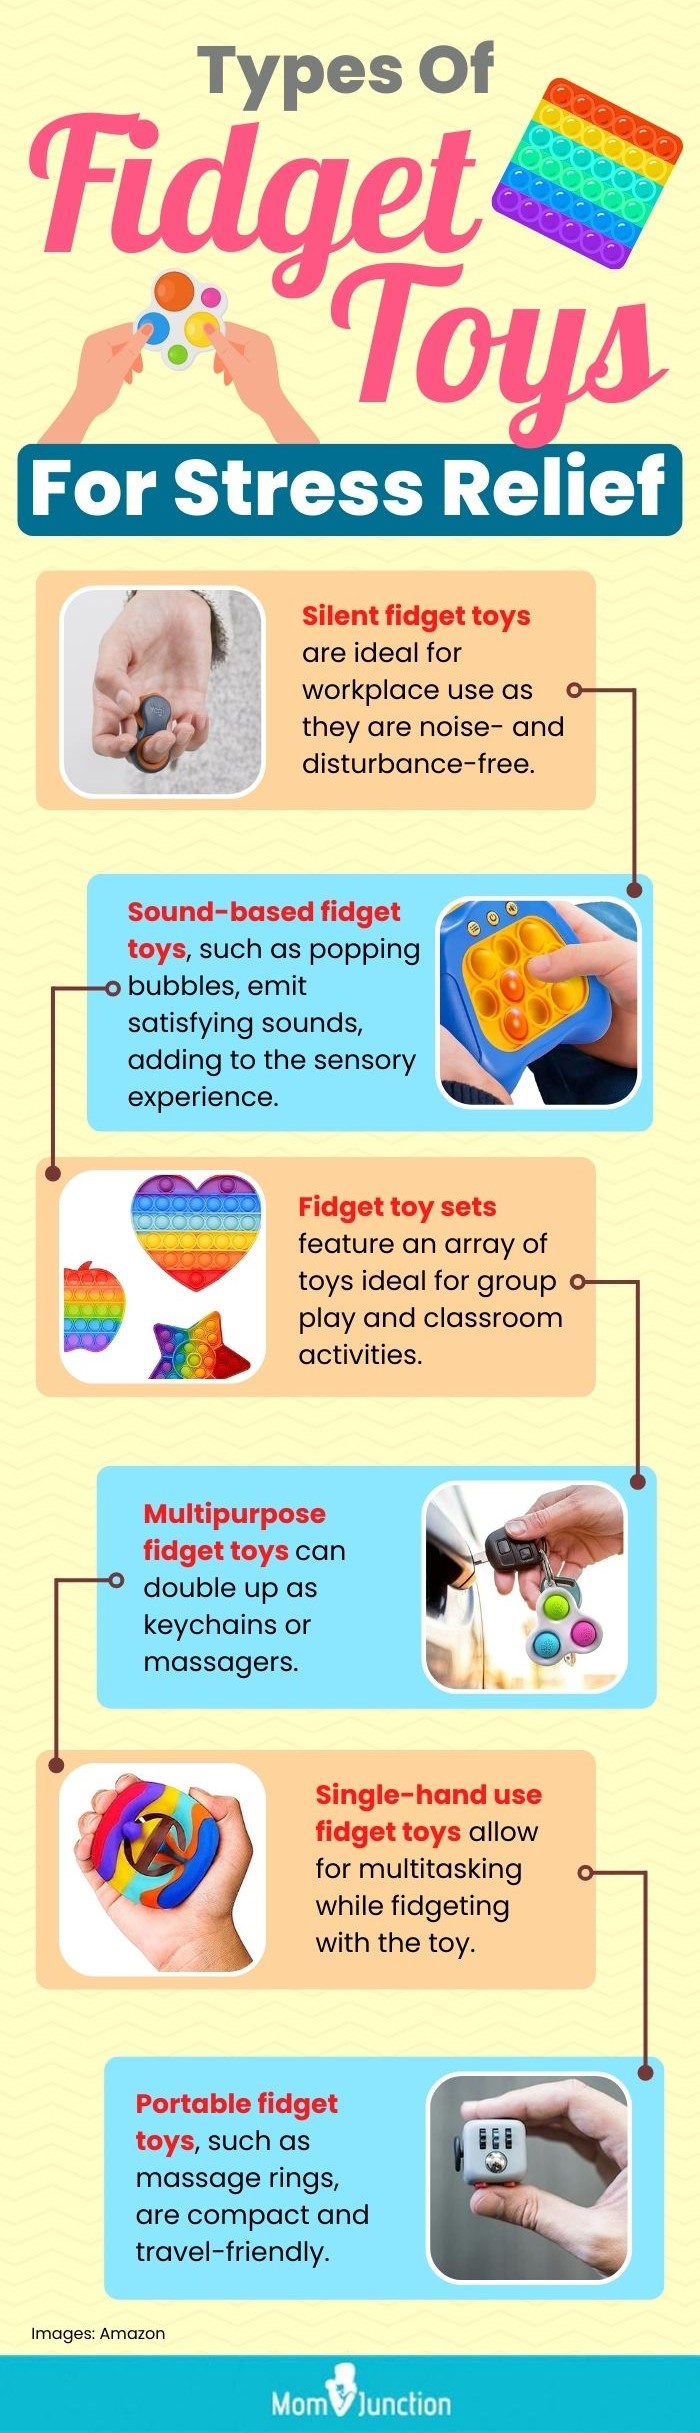 Types Of Fidget Toys For Stress Relief (infographic)